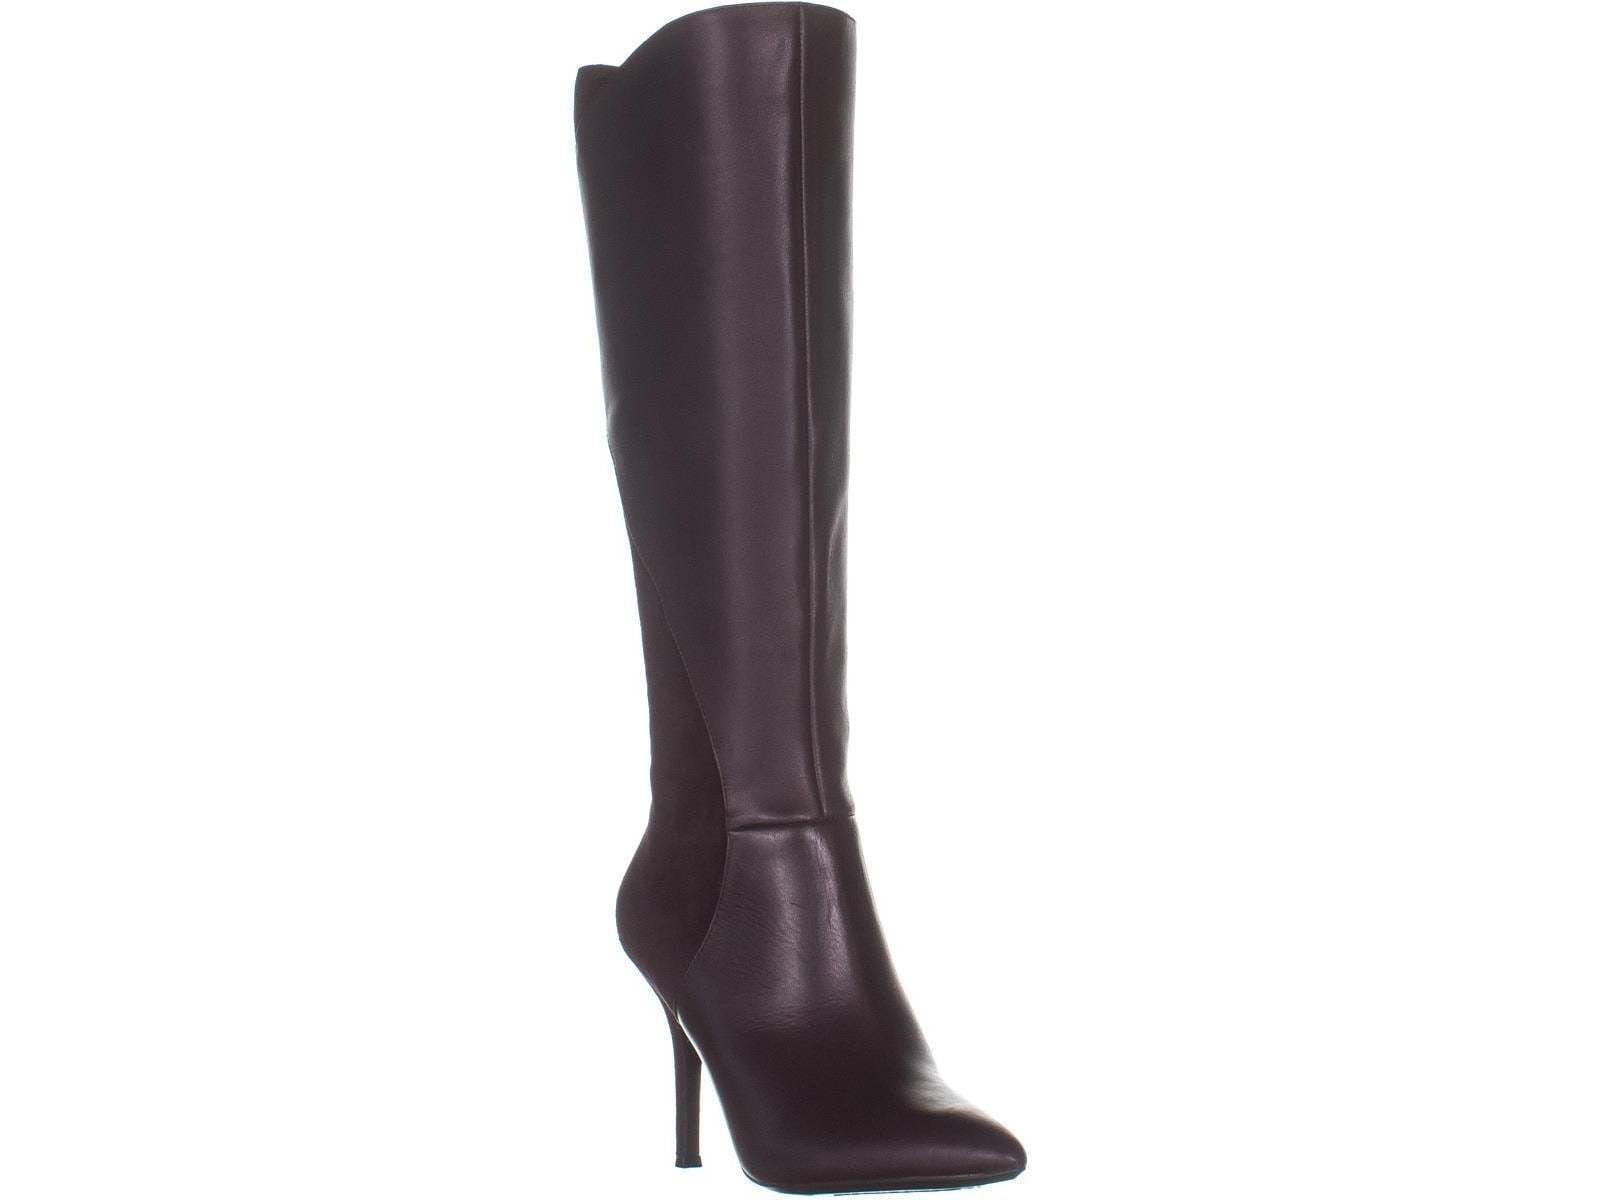 fame knee high boots